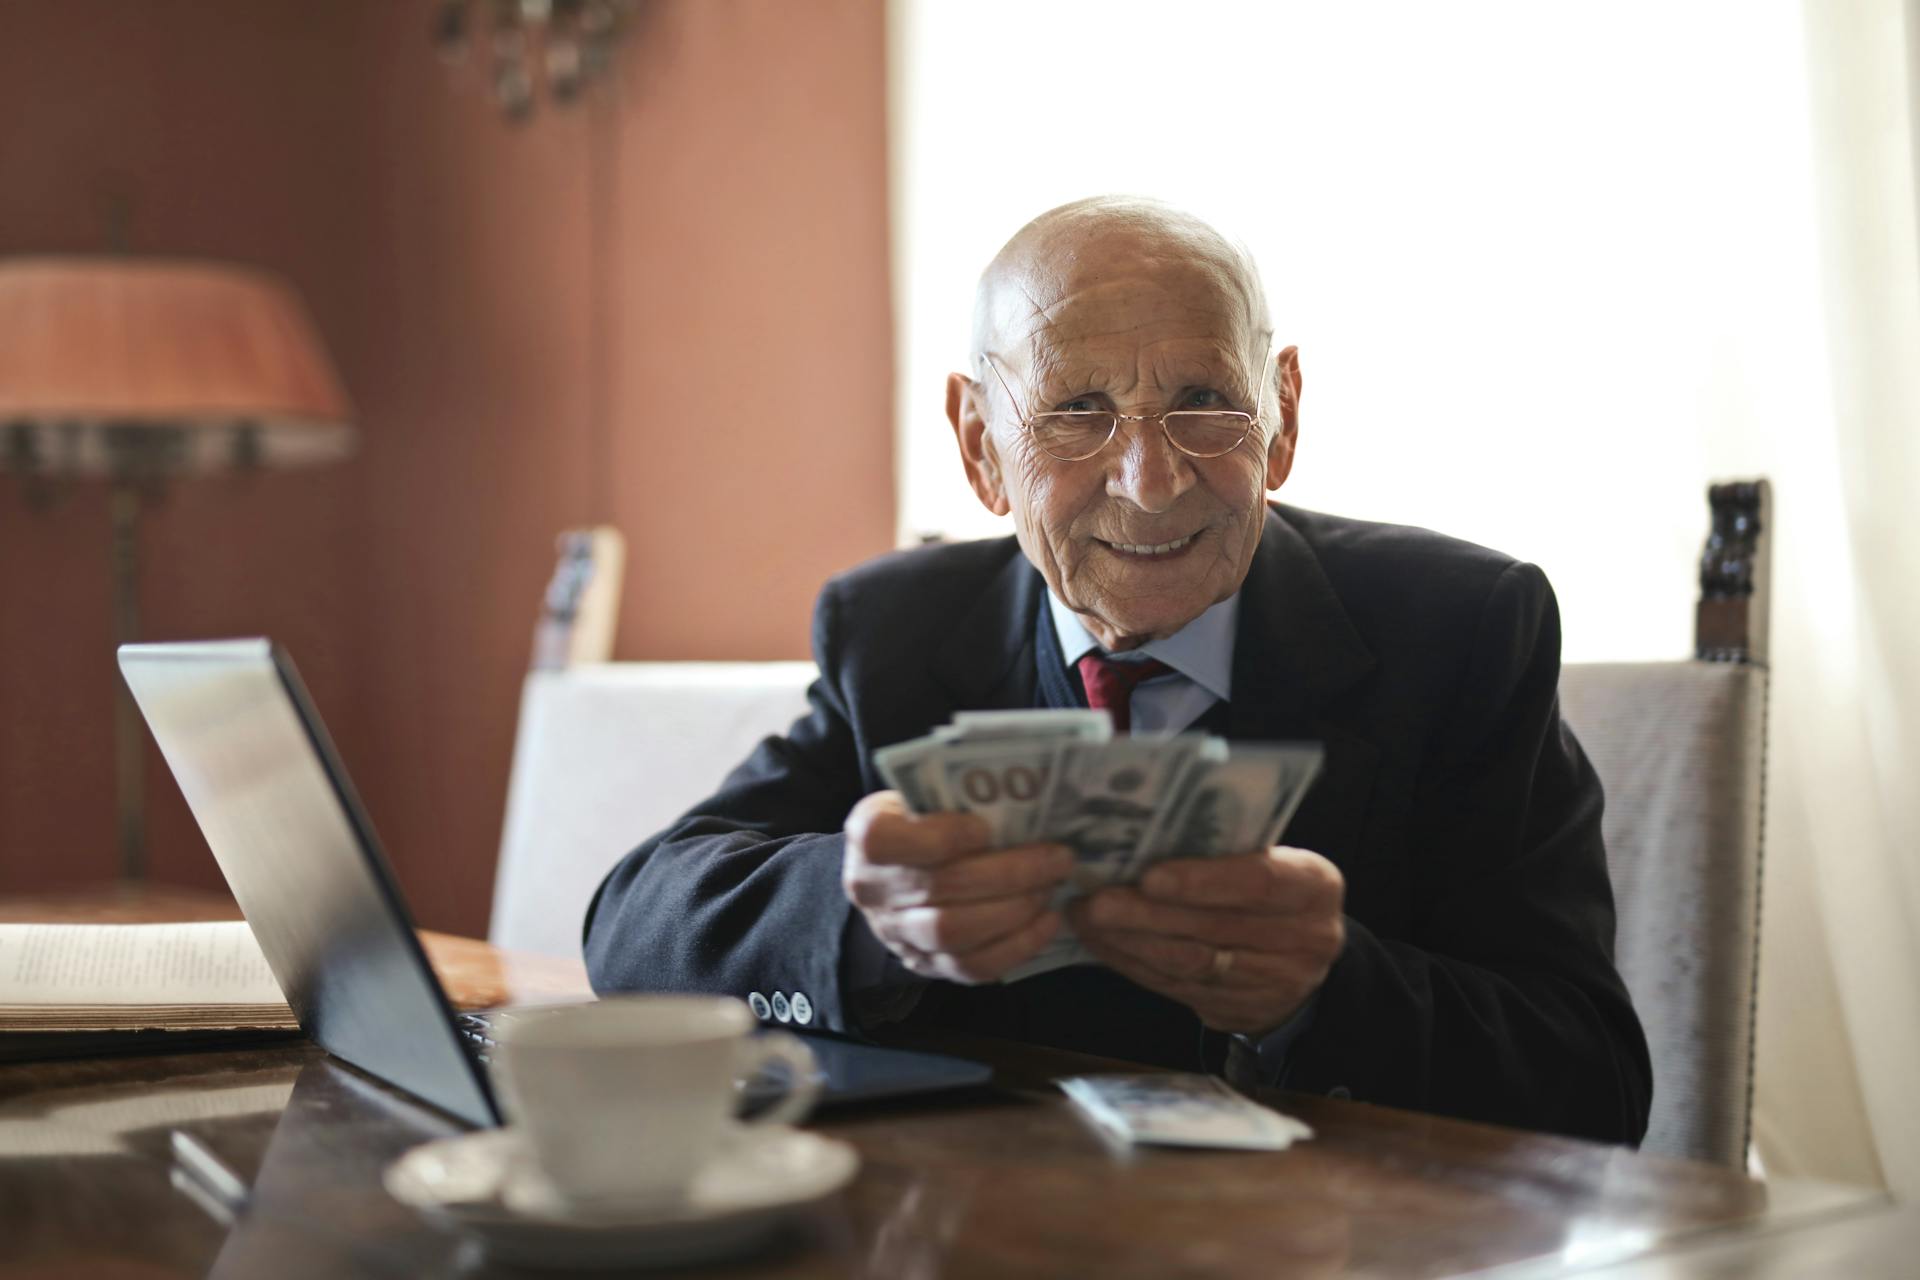 <p>Investing is an important part of retirement planning, but it’s essential to understand the risks involved. Diversifying your investment portfolio and adjusting your risk exposure as you approach retirement can help protect your savings from market fluctuations and economic downturns.</p>